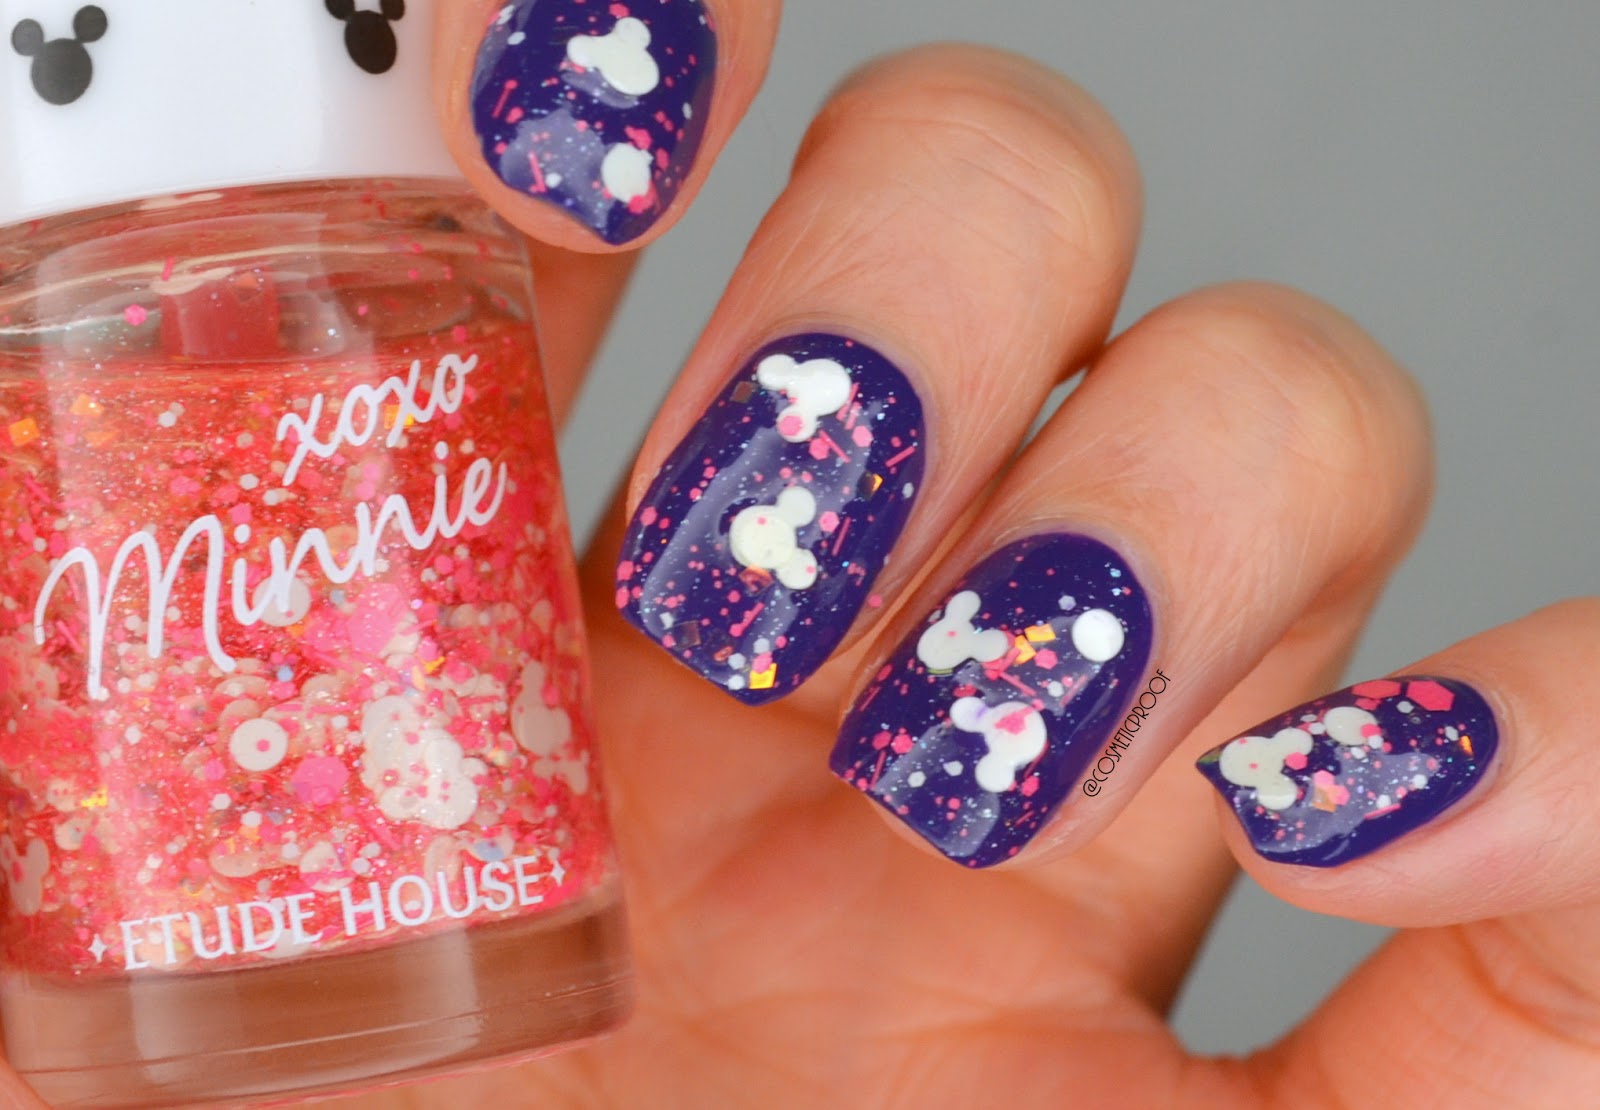 2. Minnie Mouse Nail Design - wide 10